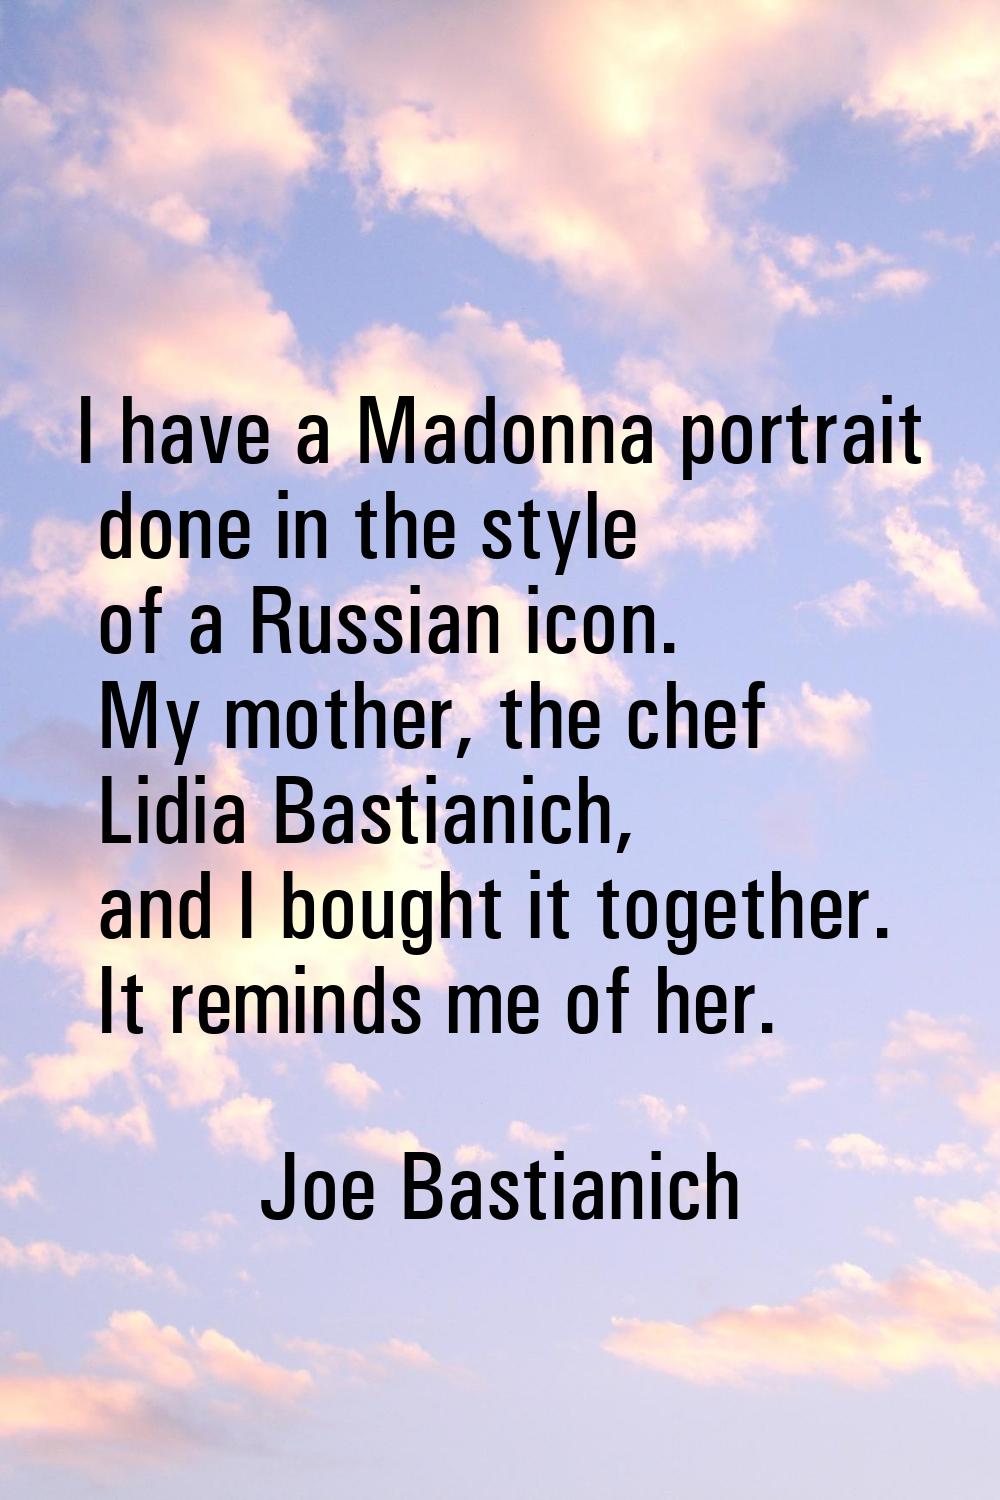 I have a Madonna portrait done in the style of a Russian icon. My mother, the chef Lidia Bastianich